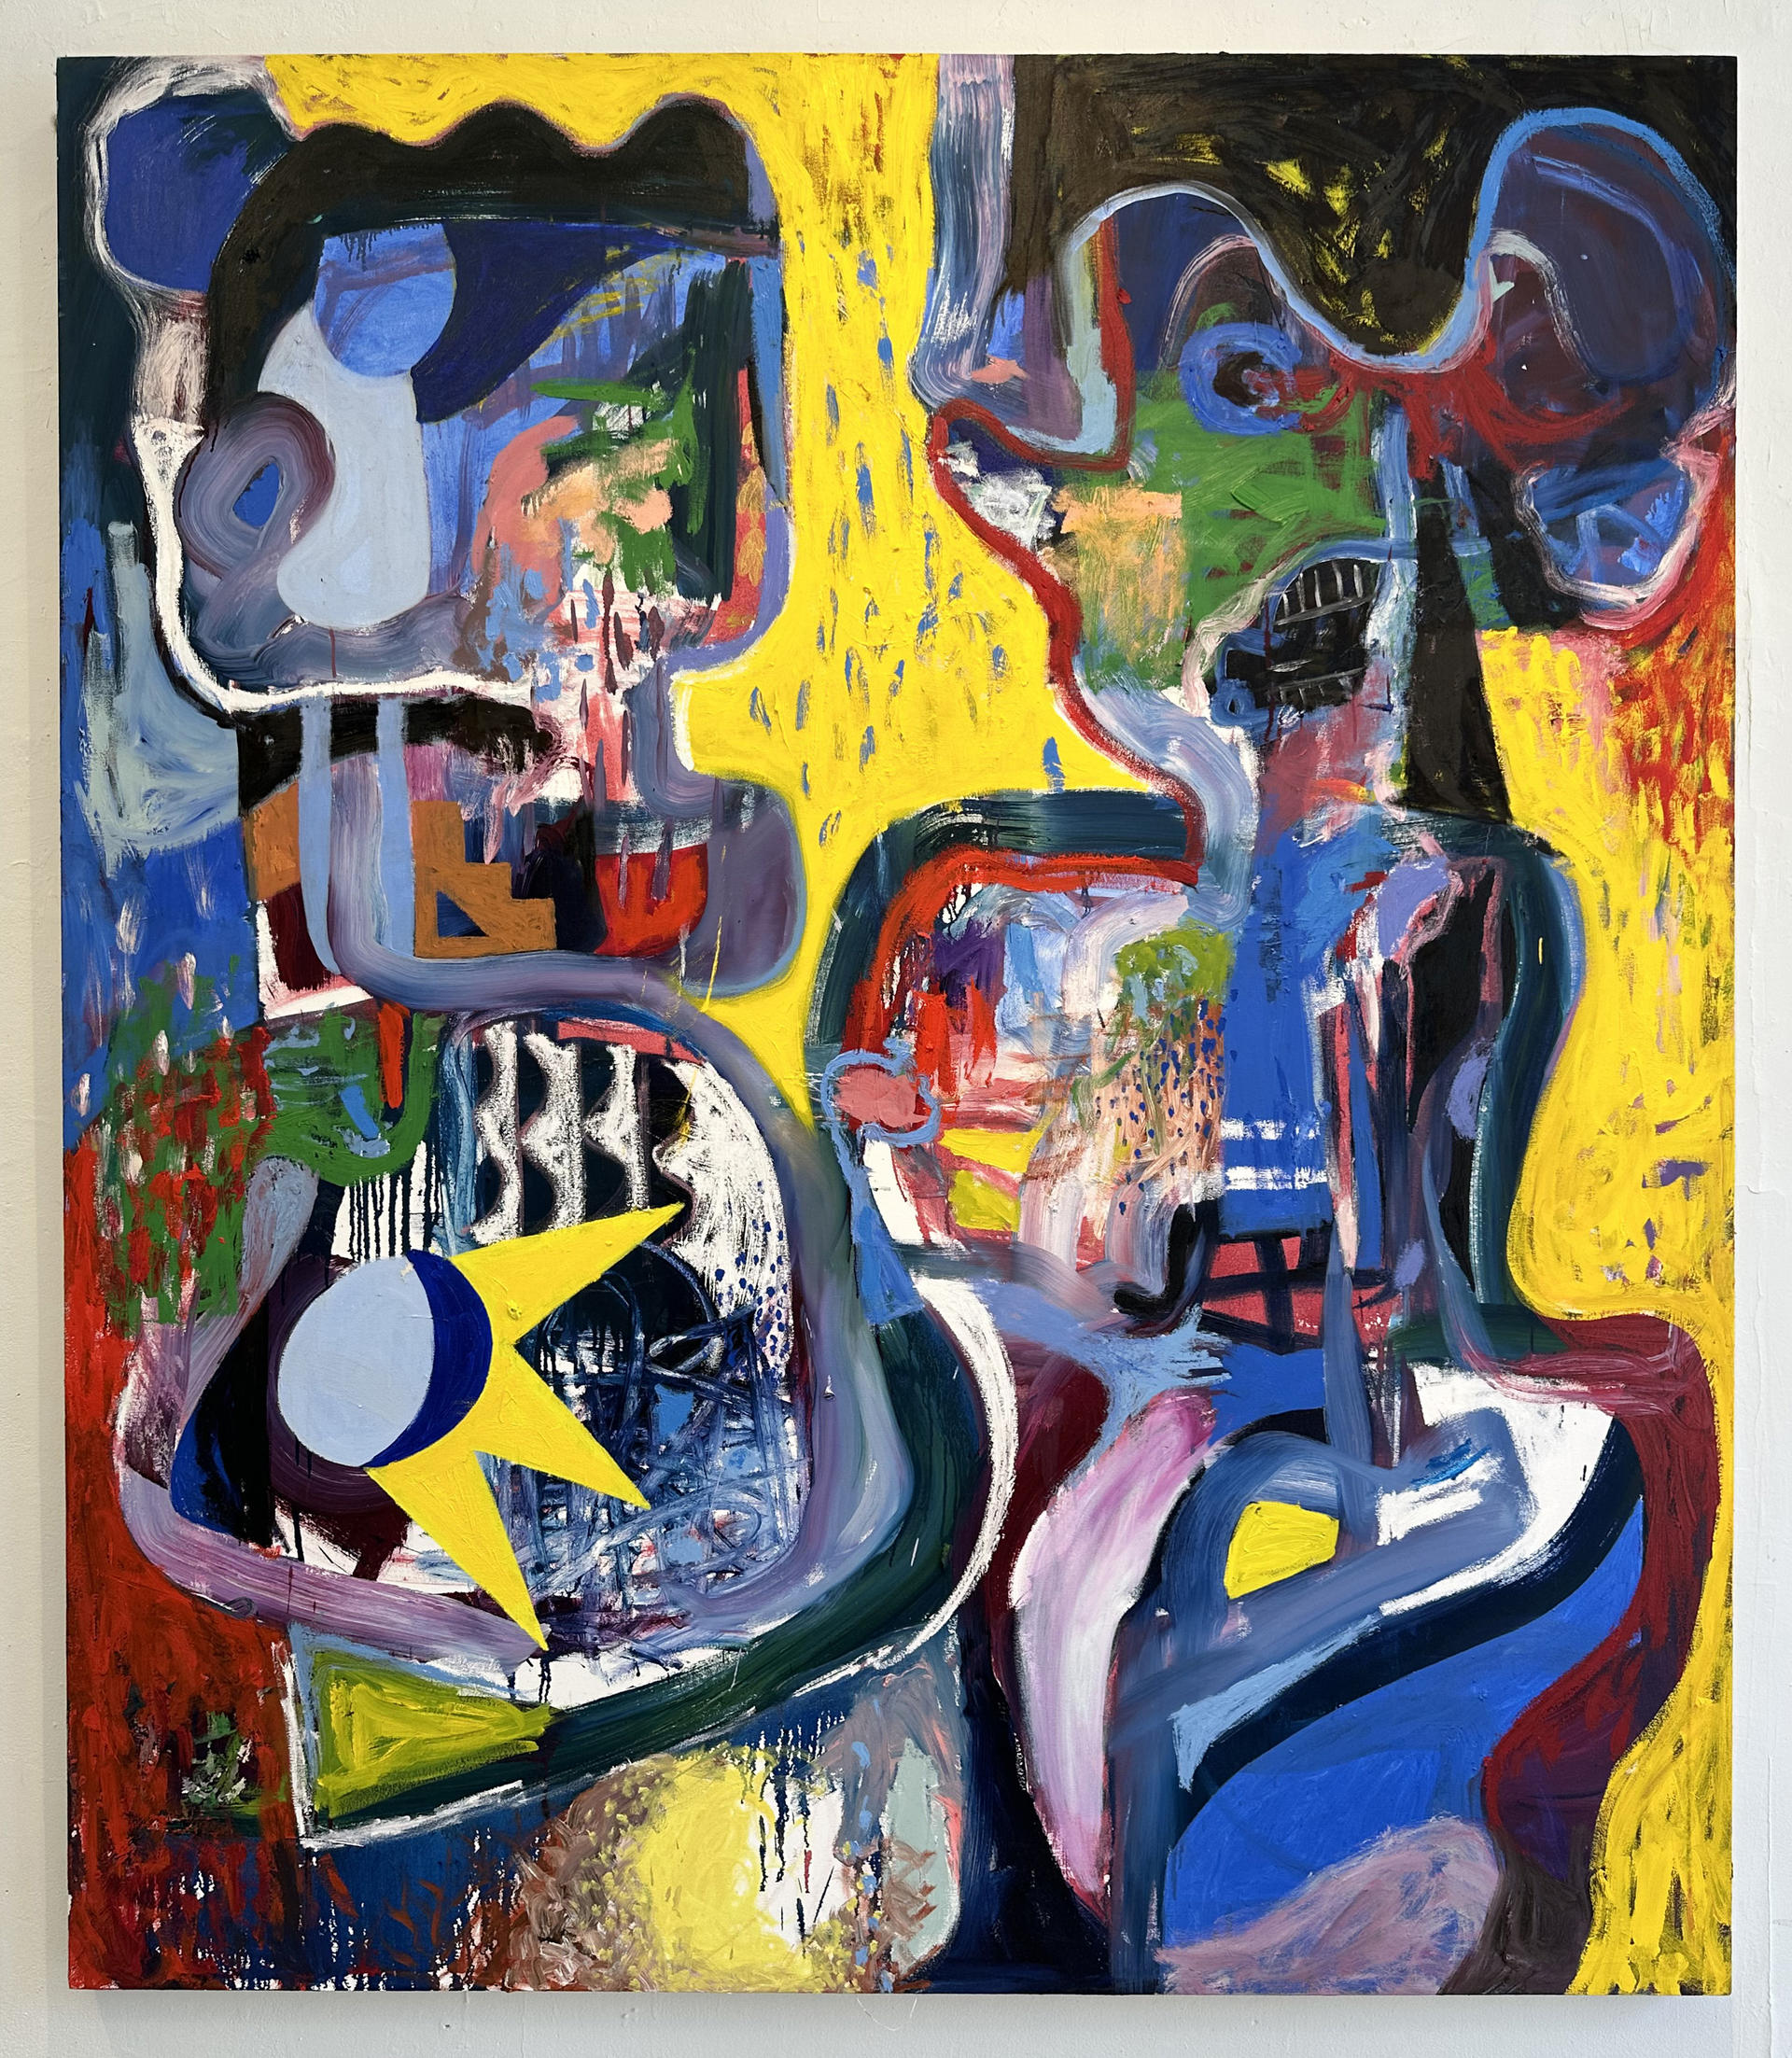 Two abstract figures interacting. 